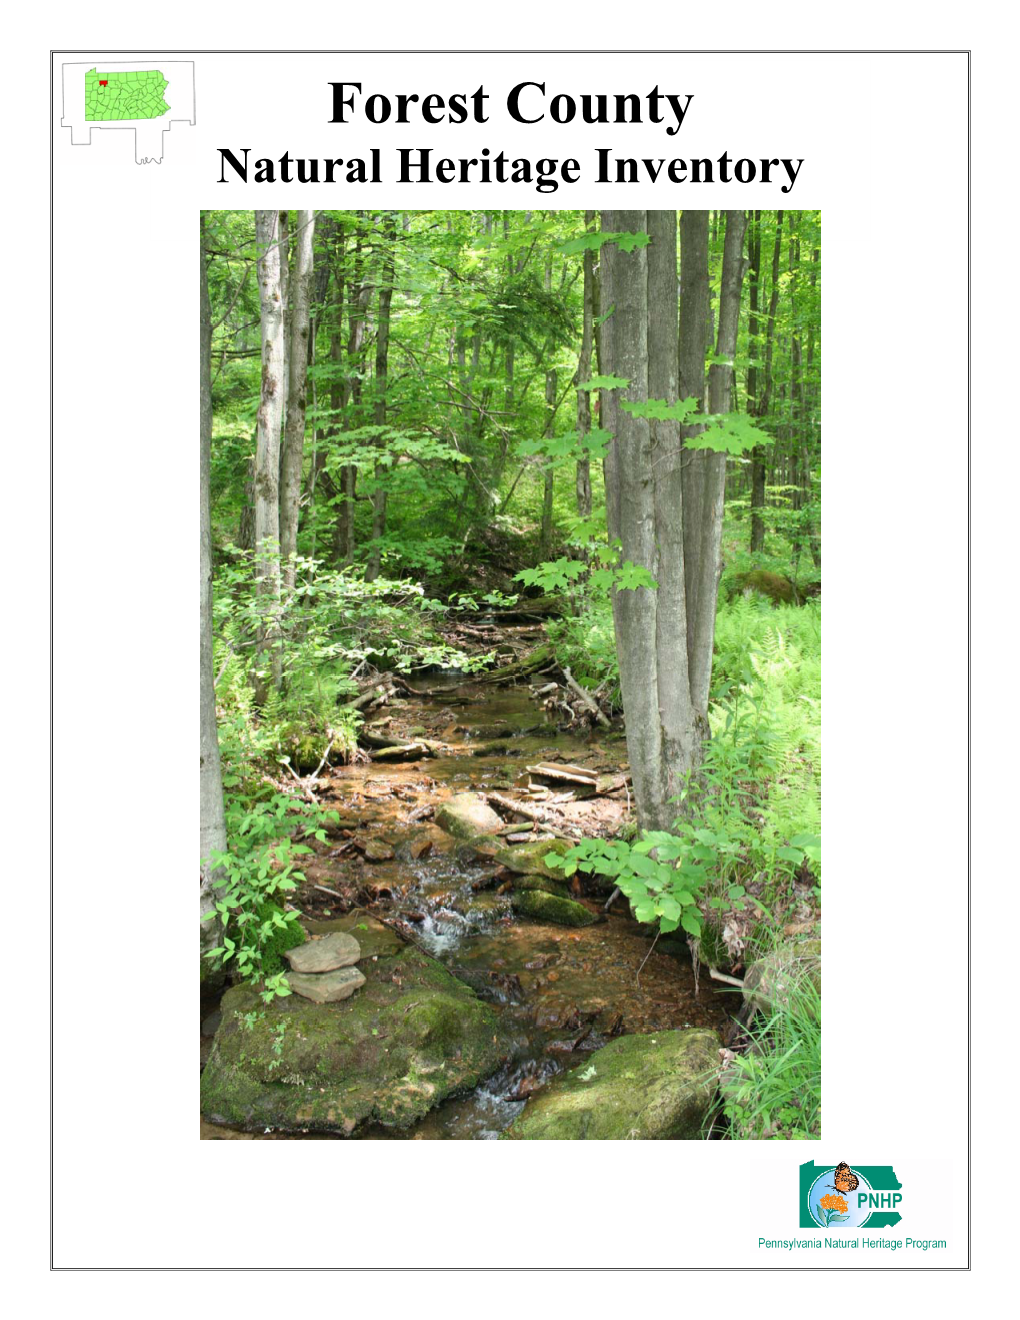 Forest County Natural Heritage Inventory